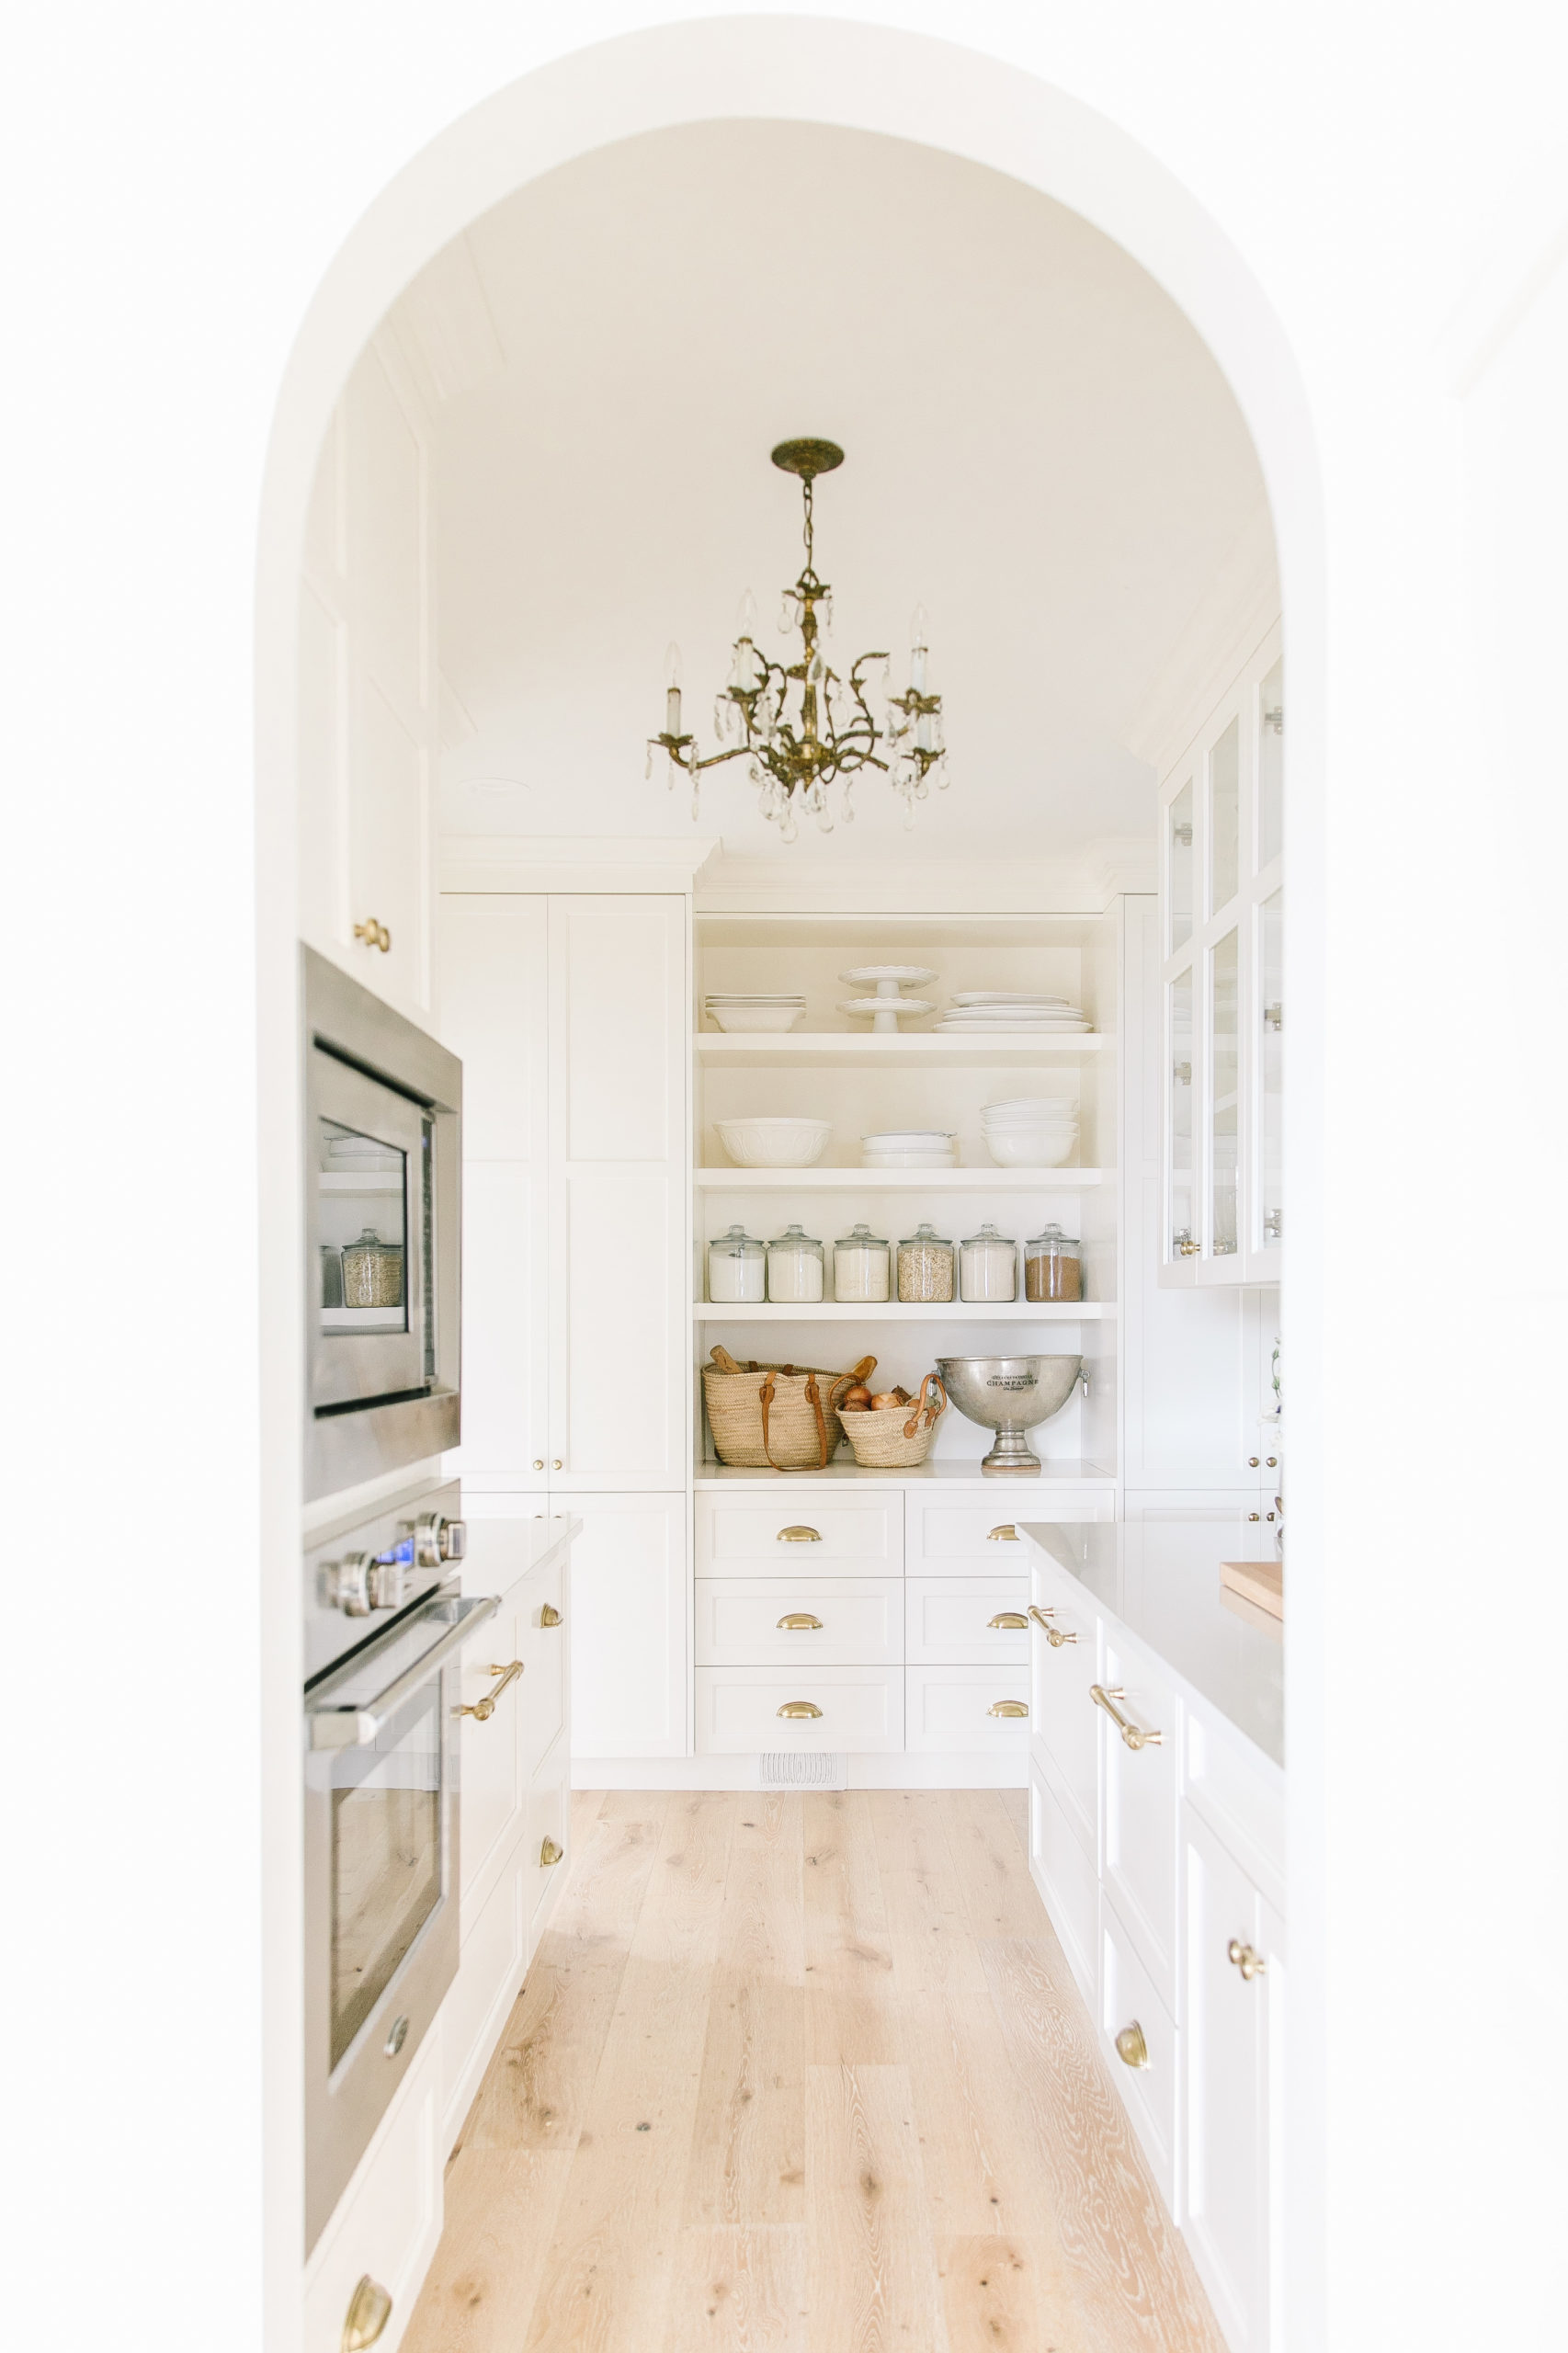 Our white butler's pantry reveal with an arched doorway, vintage chandelier lighting and open shelving. 